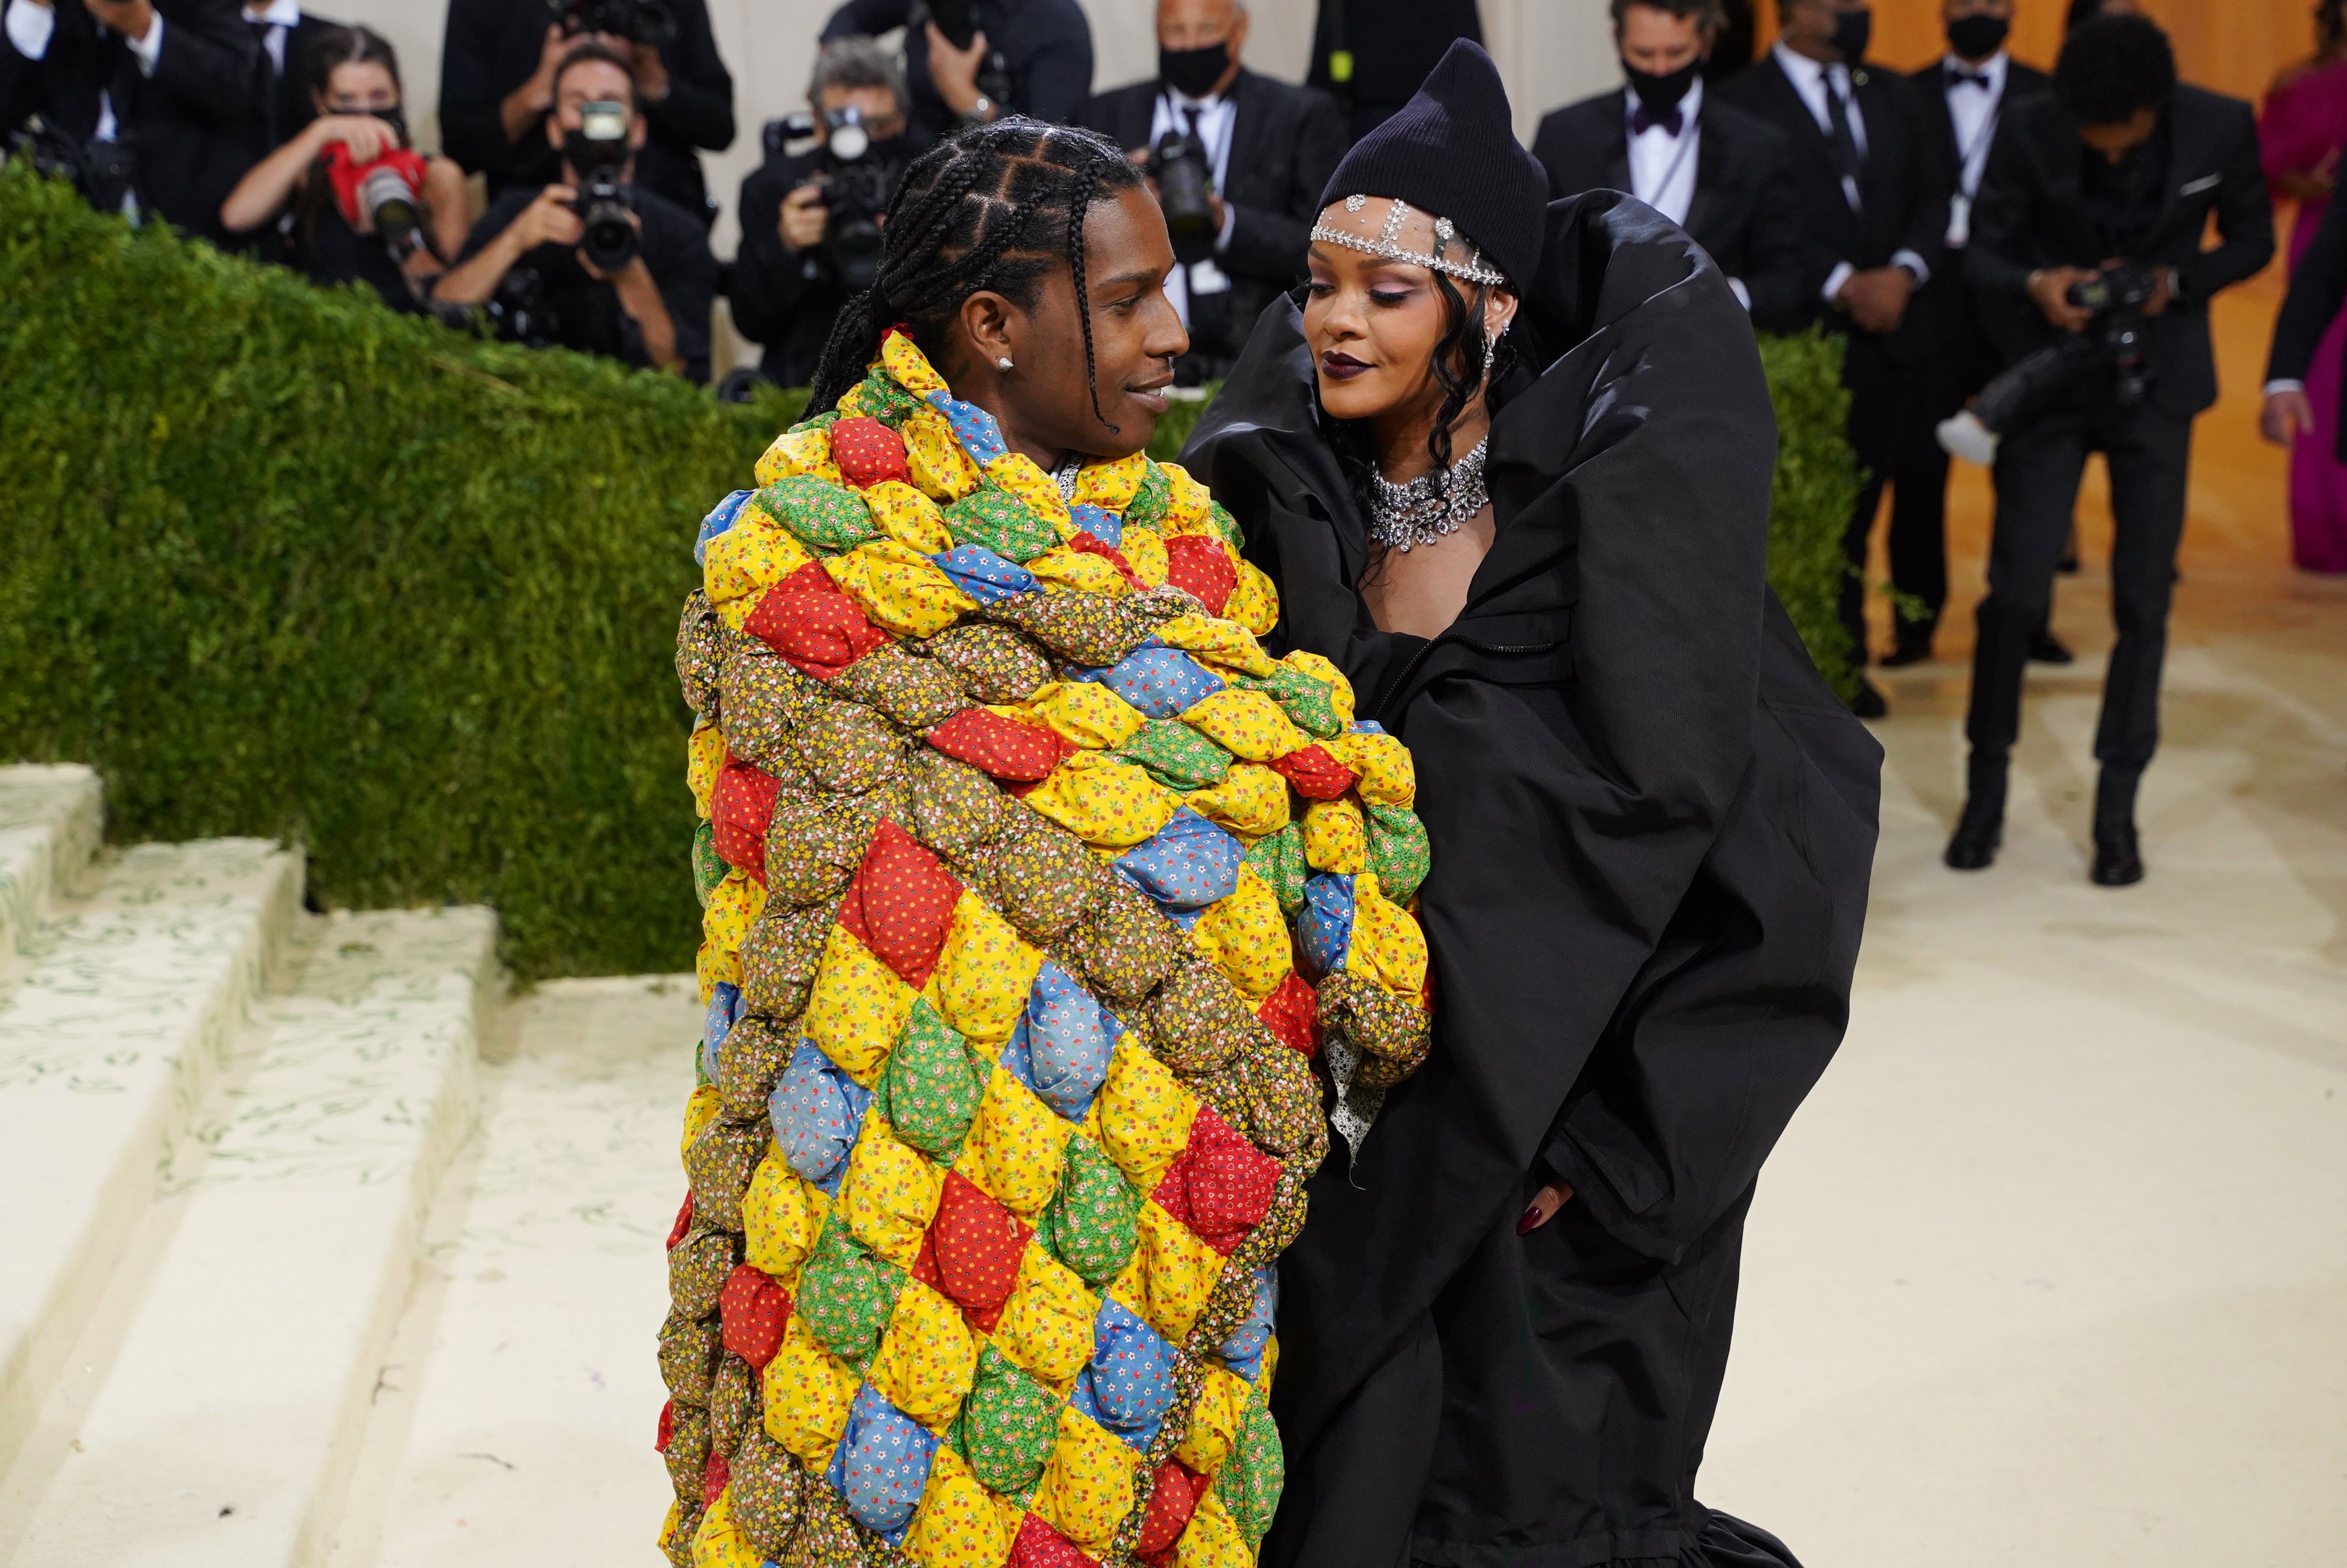 A$AP Rocky and Rihanna at the Costume Institute Benefit - In America: A Lexicon of Fashion on September 13, 2021, in New York City. | Source: Sean Zanni/Patrick McMullan/Getty Images